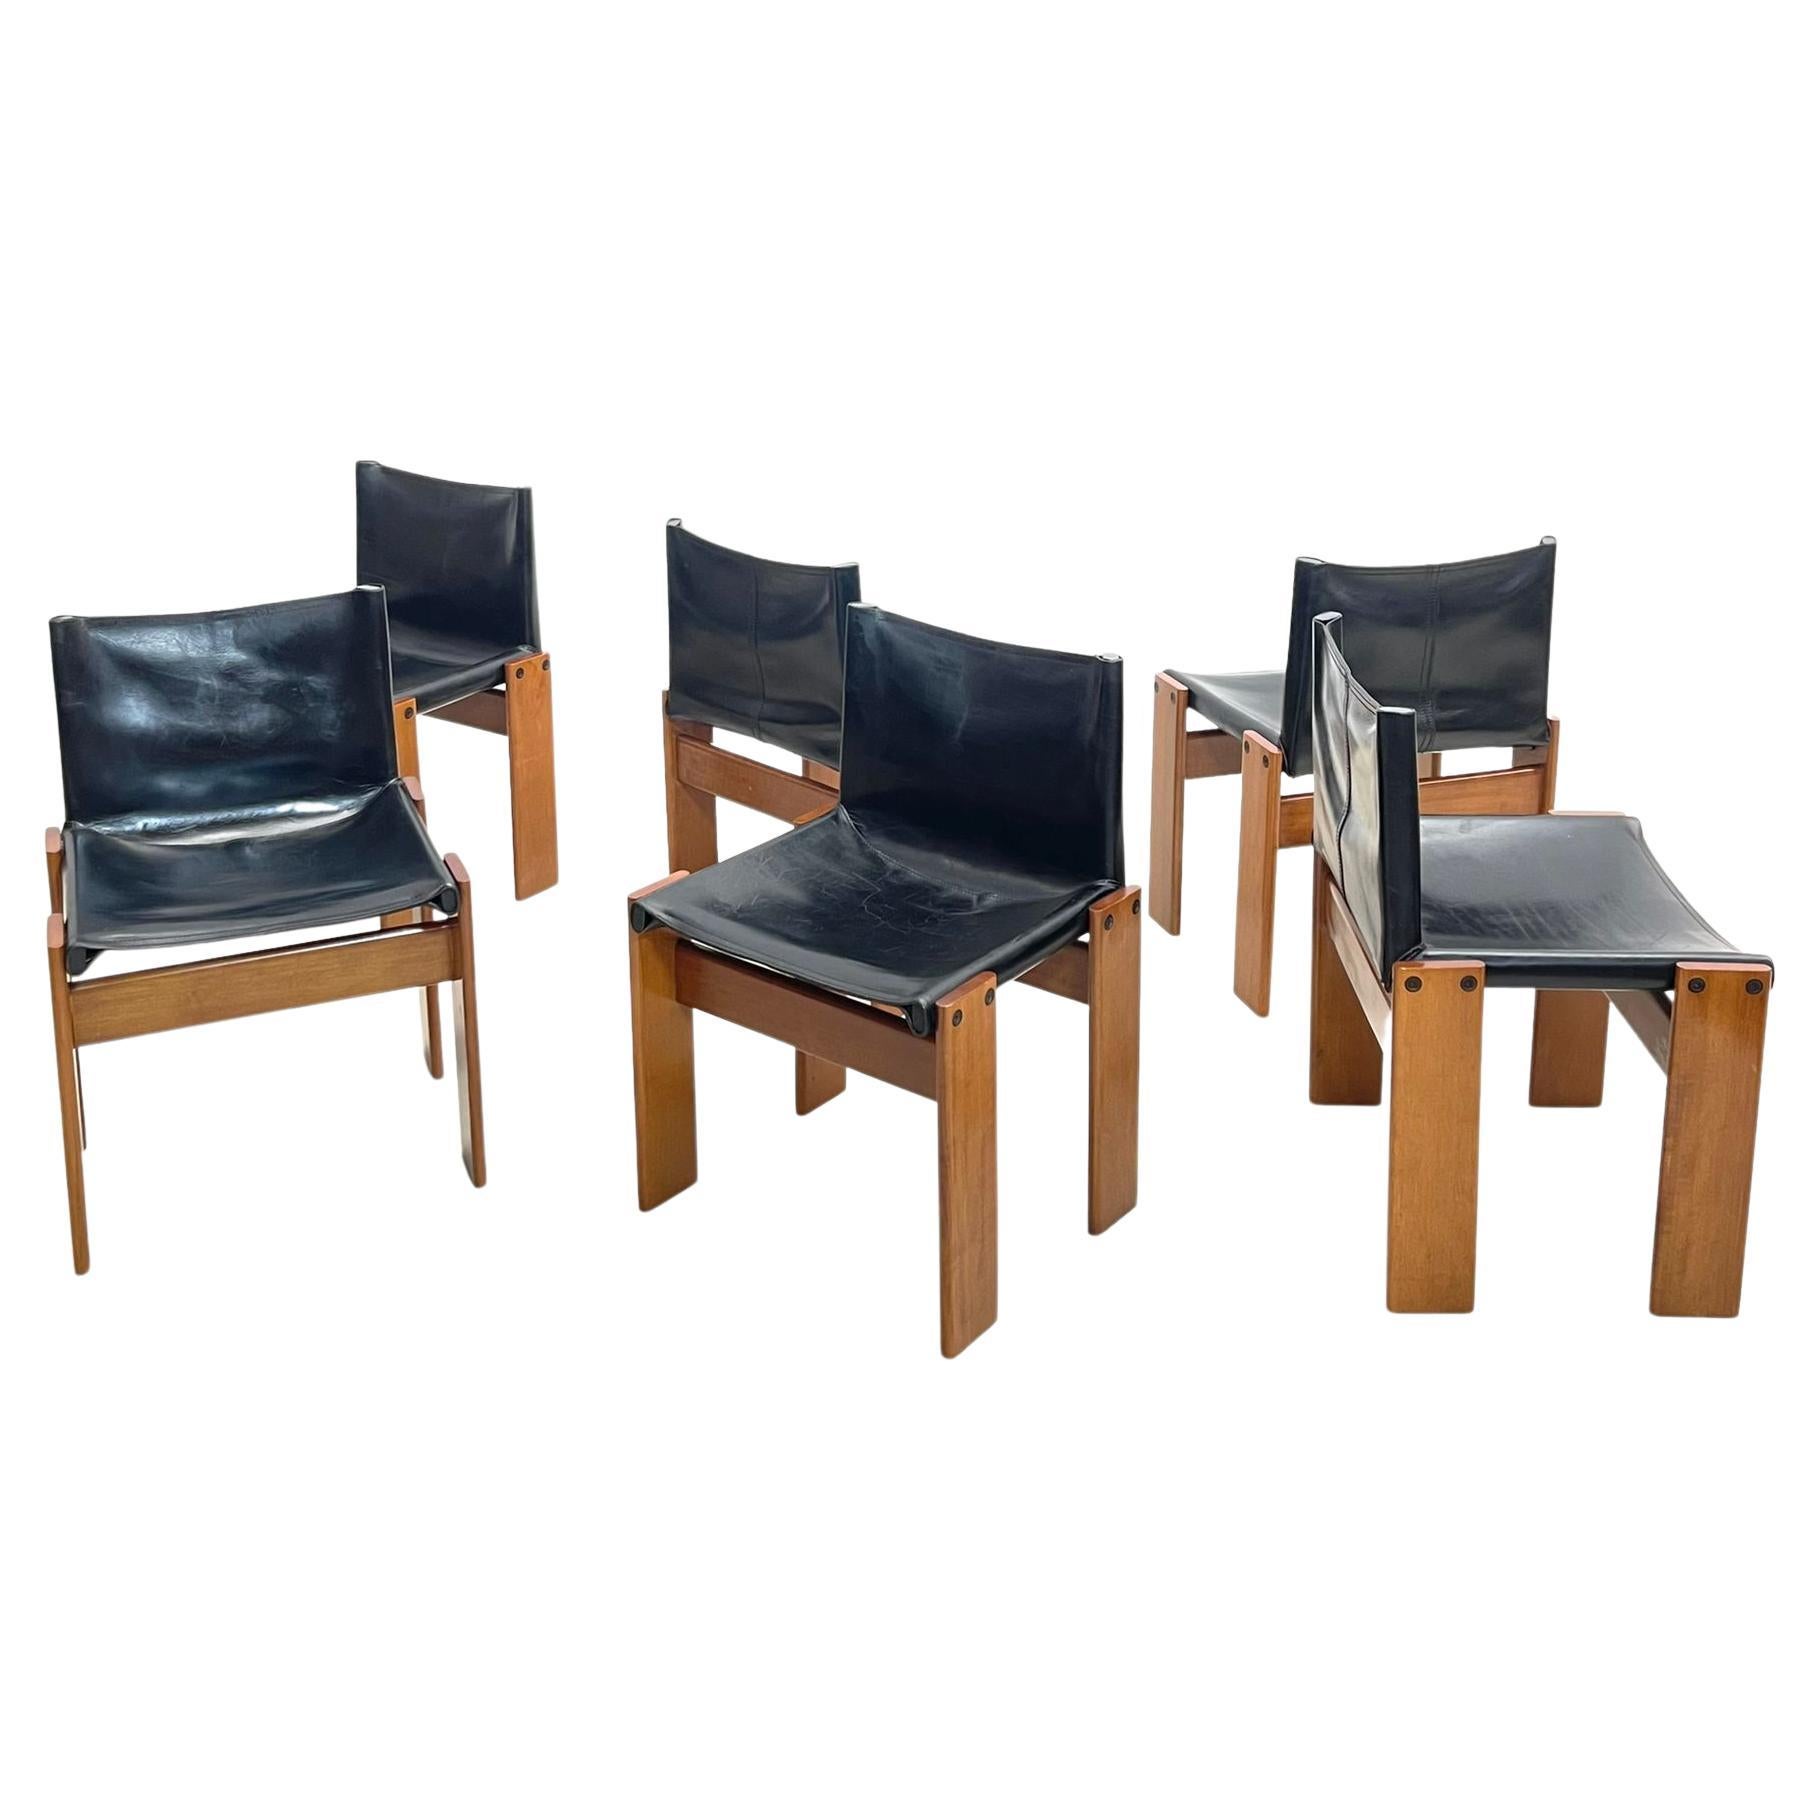 Set of 6 Black Leather Chairs Model "Monk" by Afra and Tobia Scarpa for Molteni